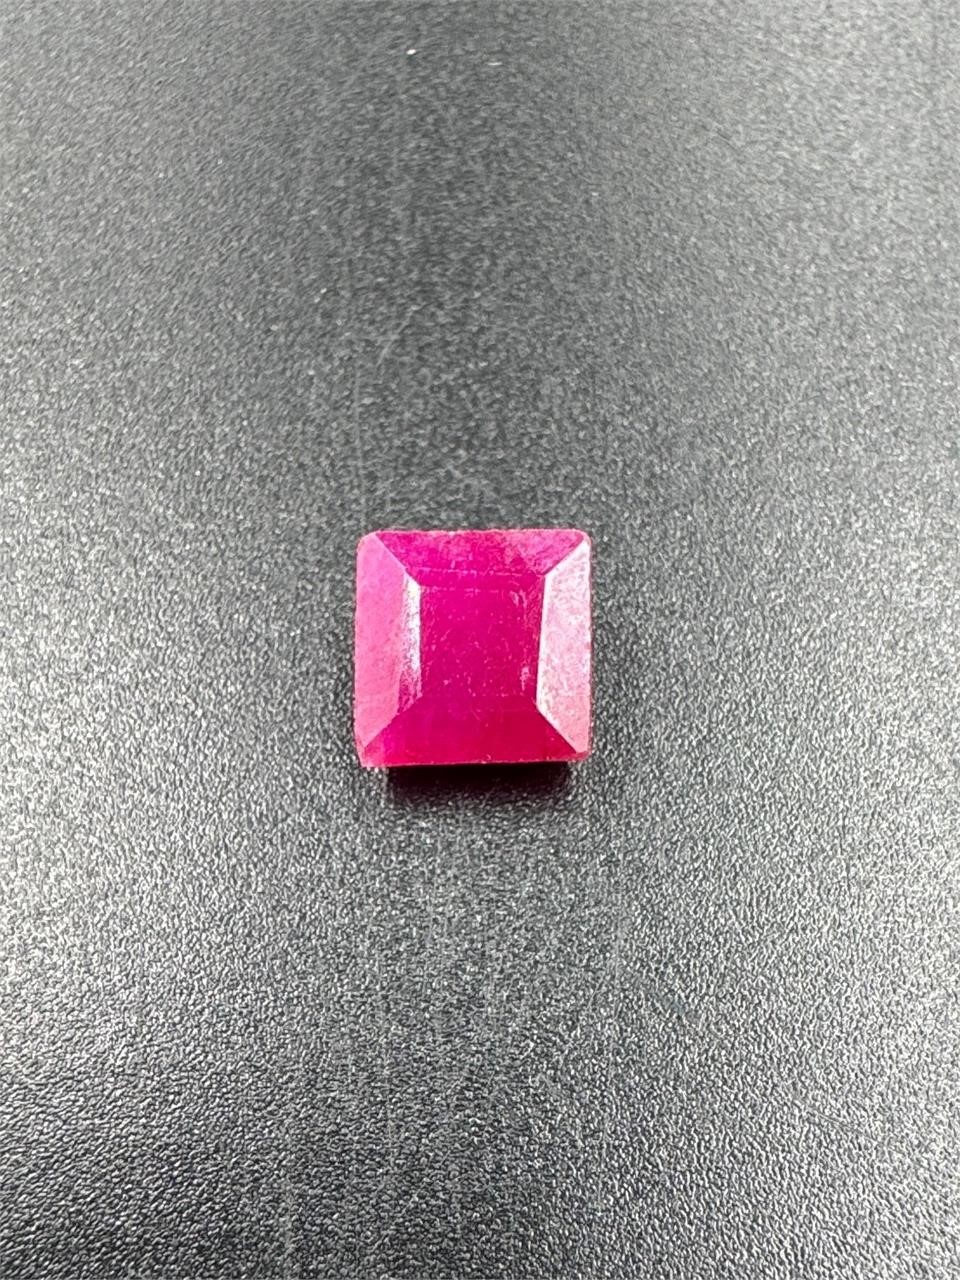 2.83 Carat Square Cut Red Ruby GIA